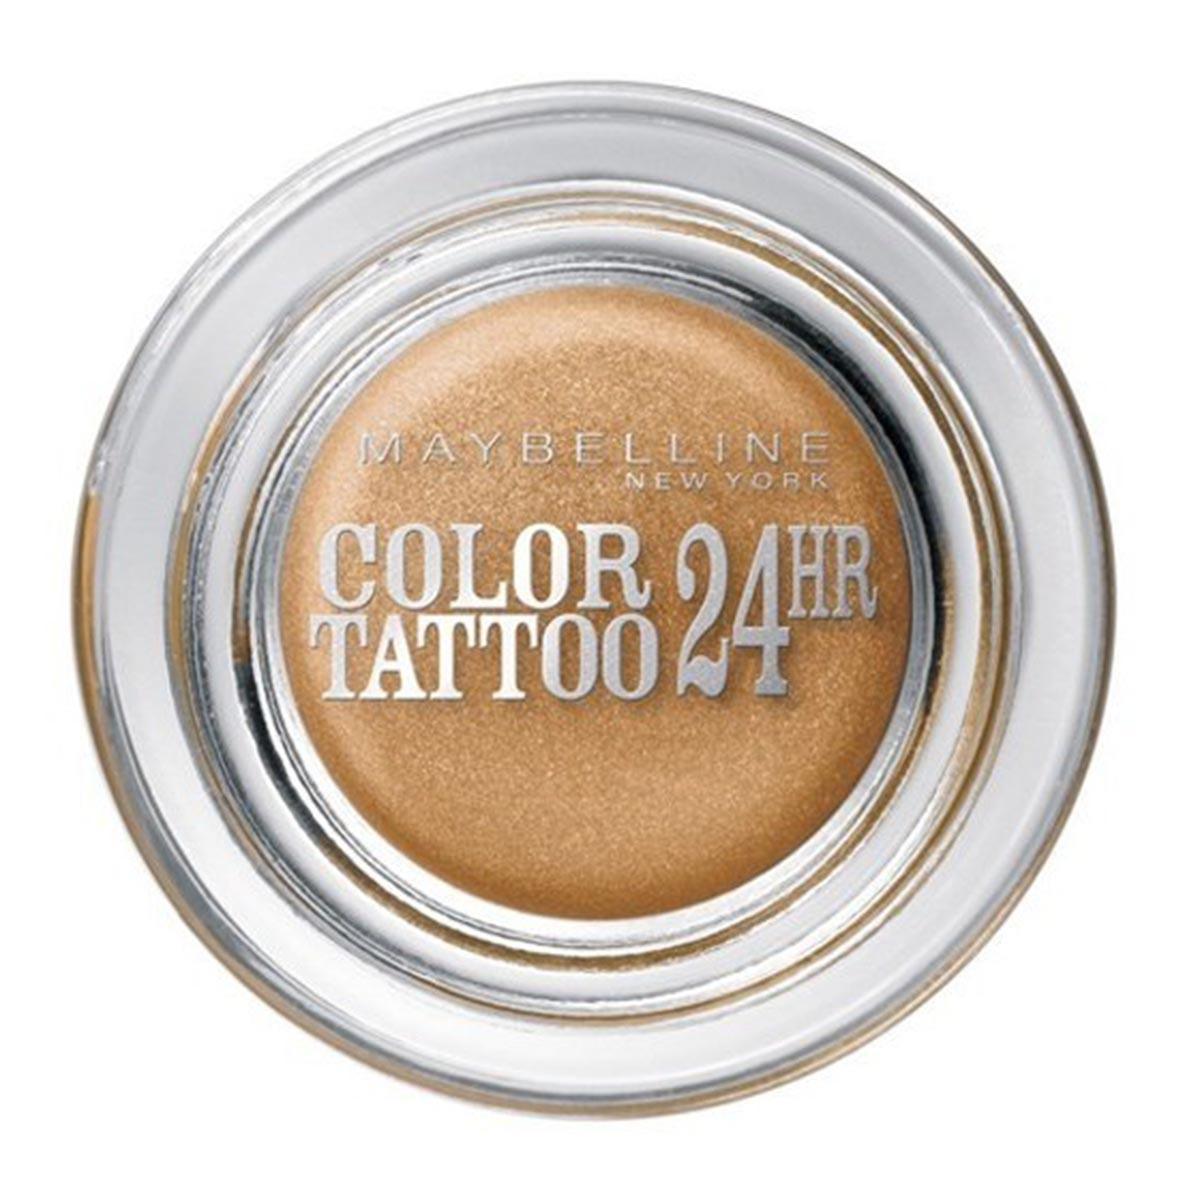 maybelline-color-tattoo-24h-005